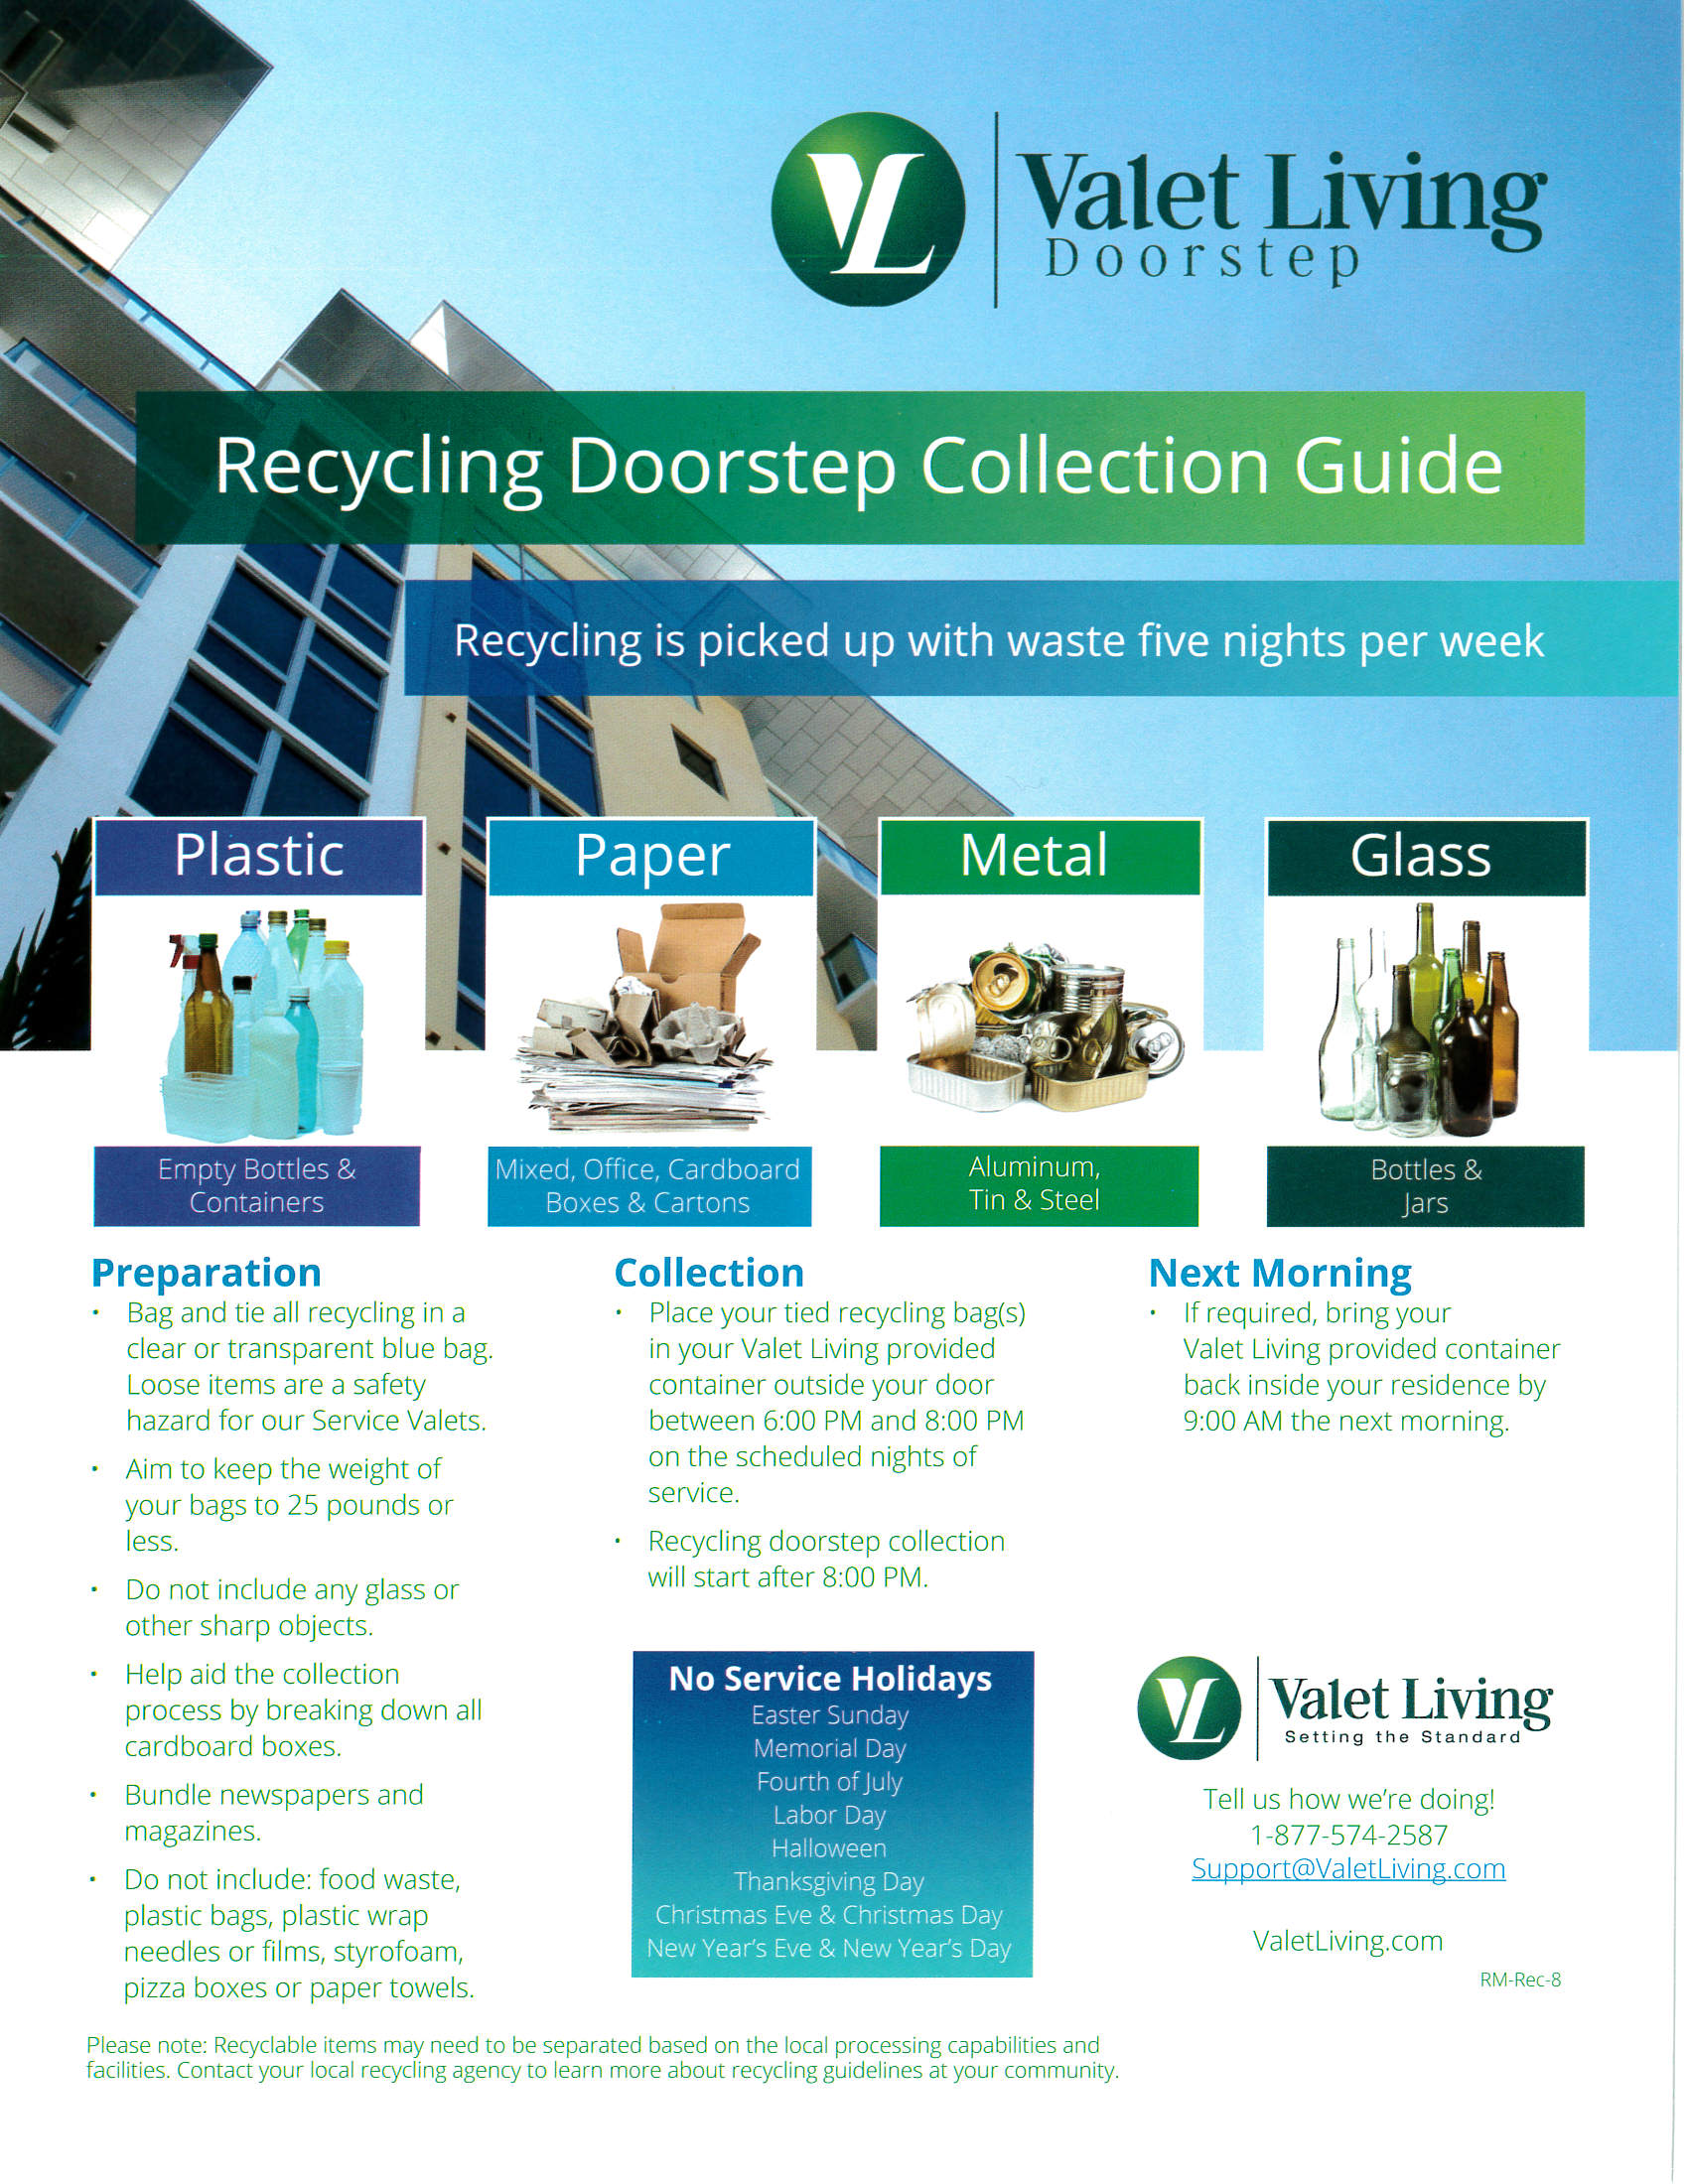 Apartment residents in The Woodlands, TX can benefit from the convenient Valet Living recycling service. This door stop collection guide ensures that tenants adequately separate and dispose of recyclable materials. Experience the ease